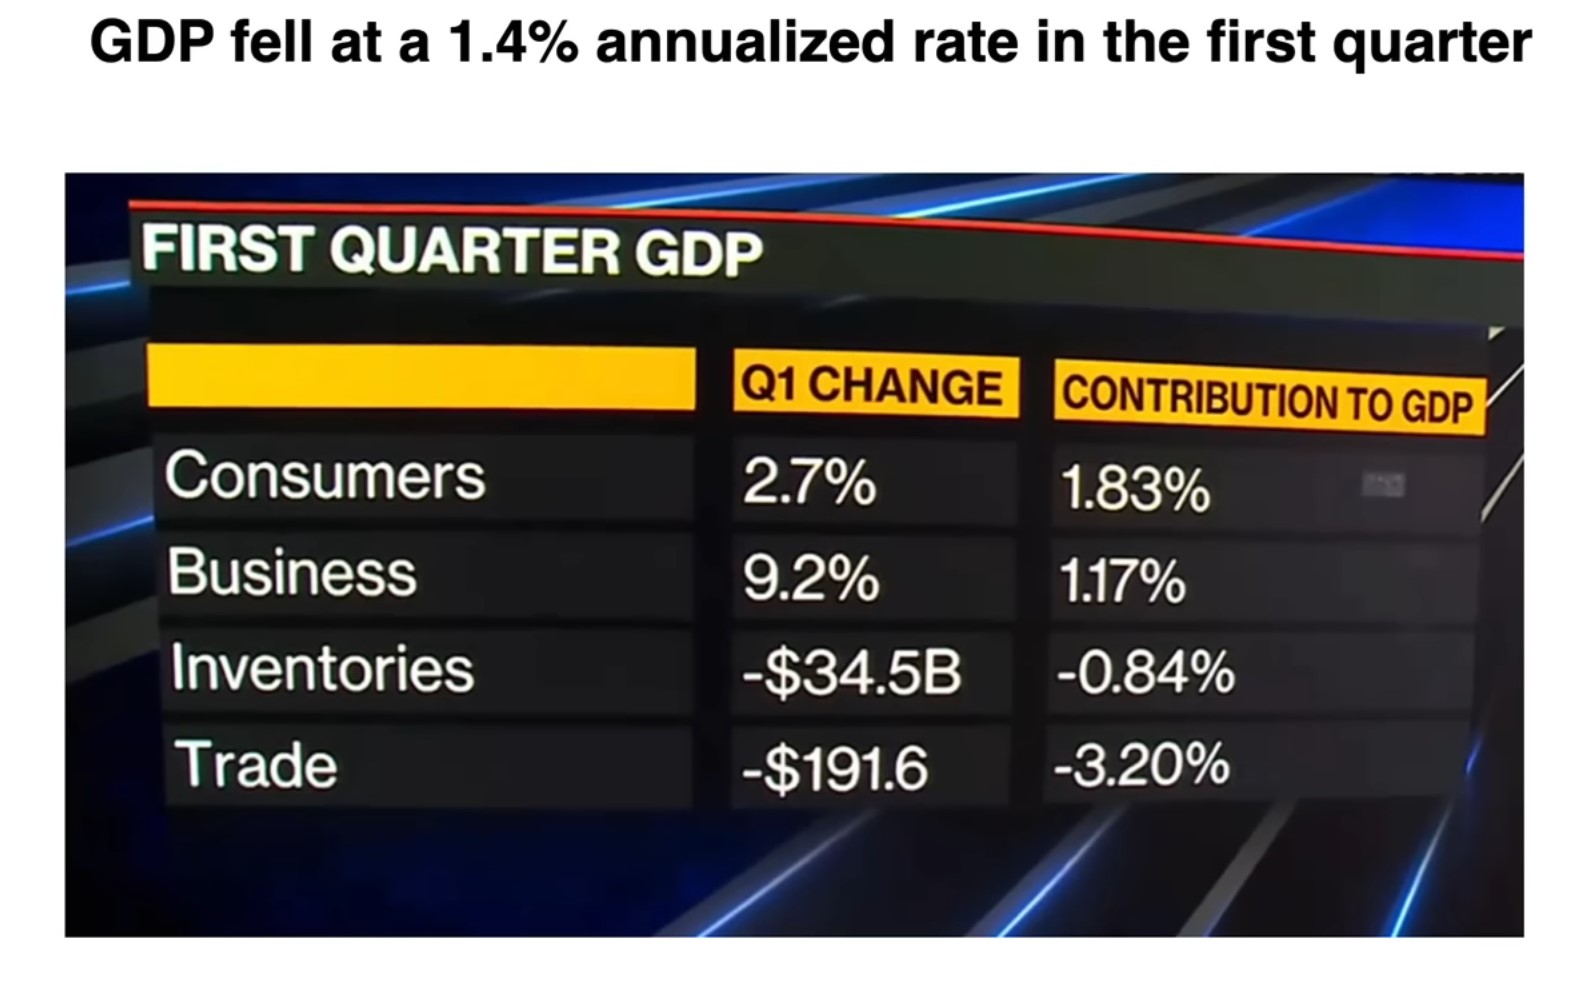 GDP fell 1.4% for the 1st quarter of 2022